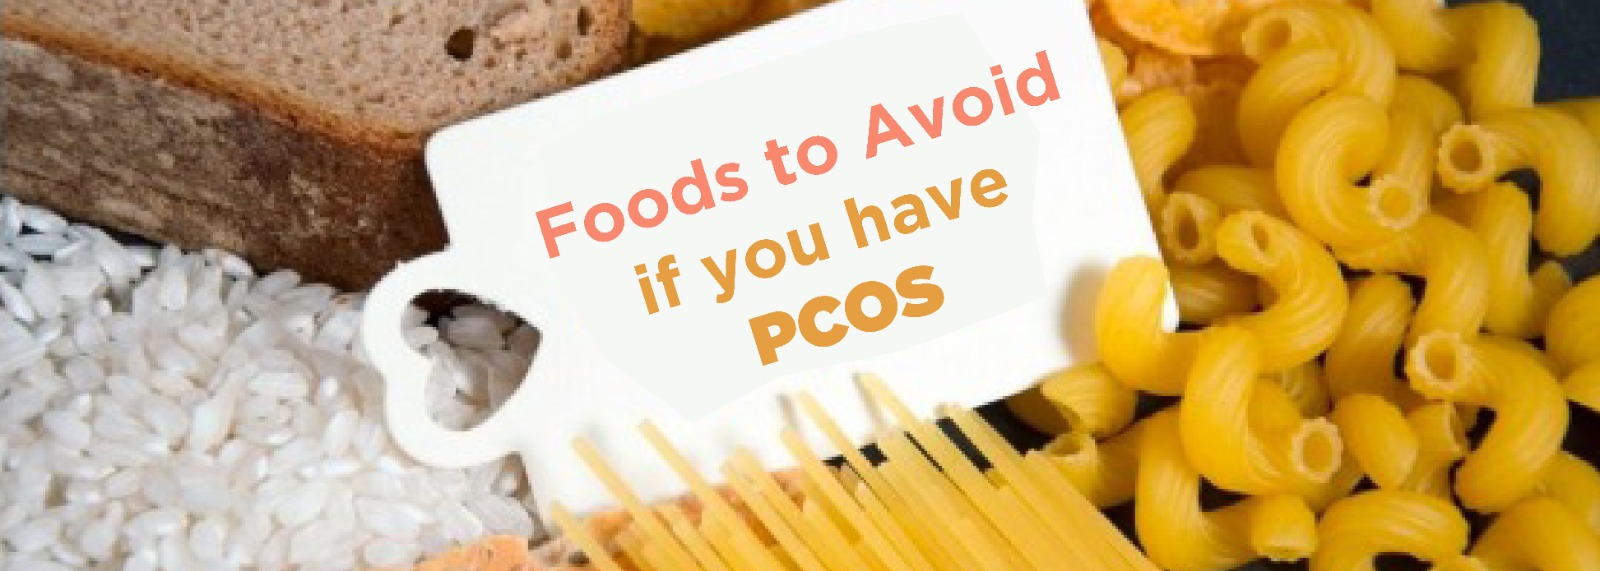 Foods to avoid if you have PCOS